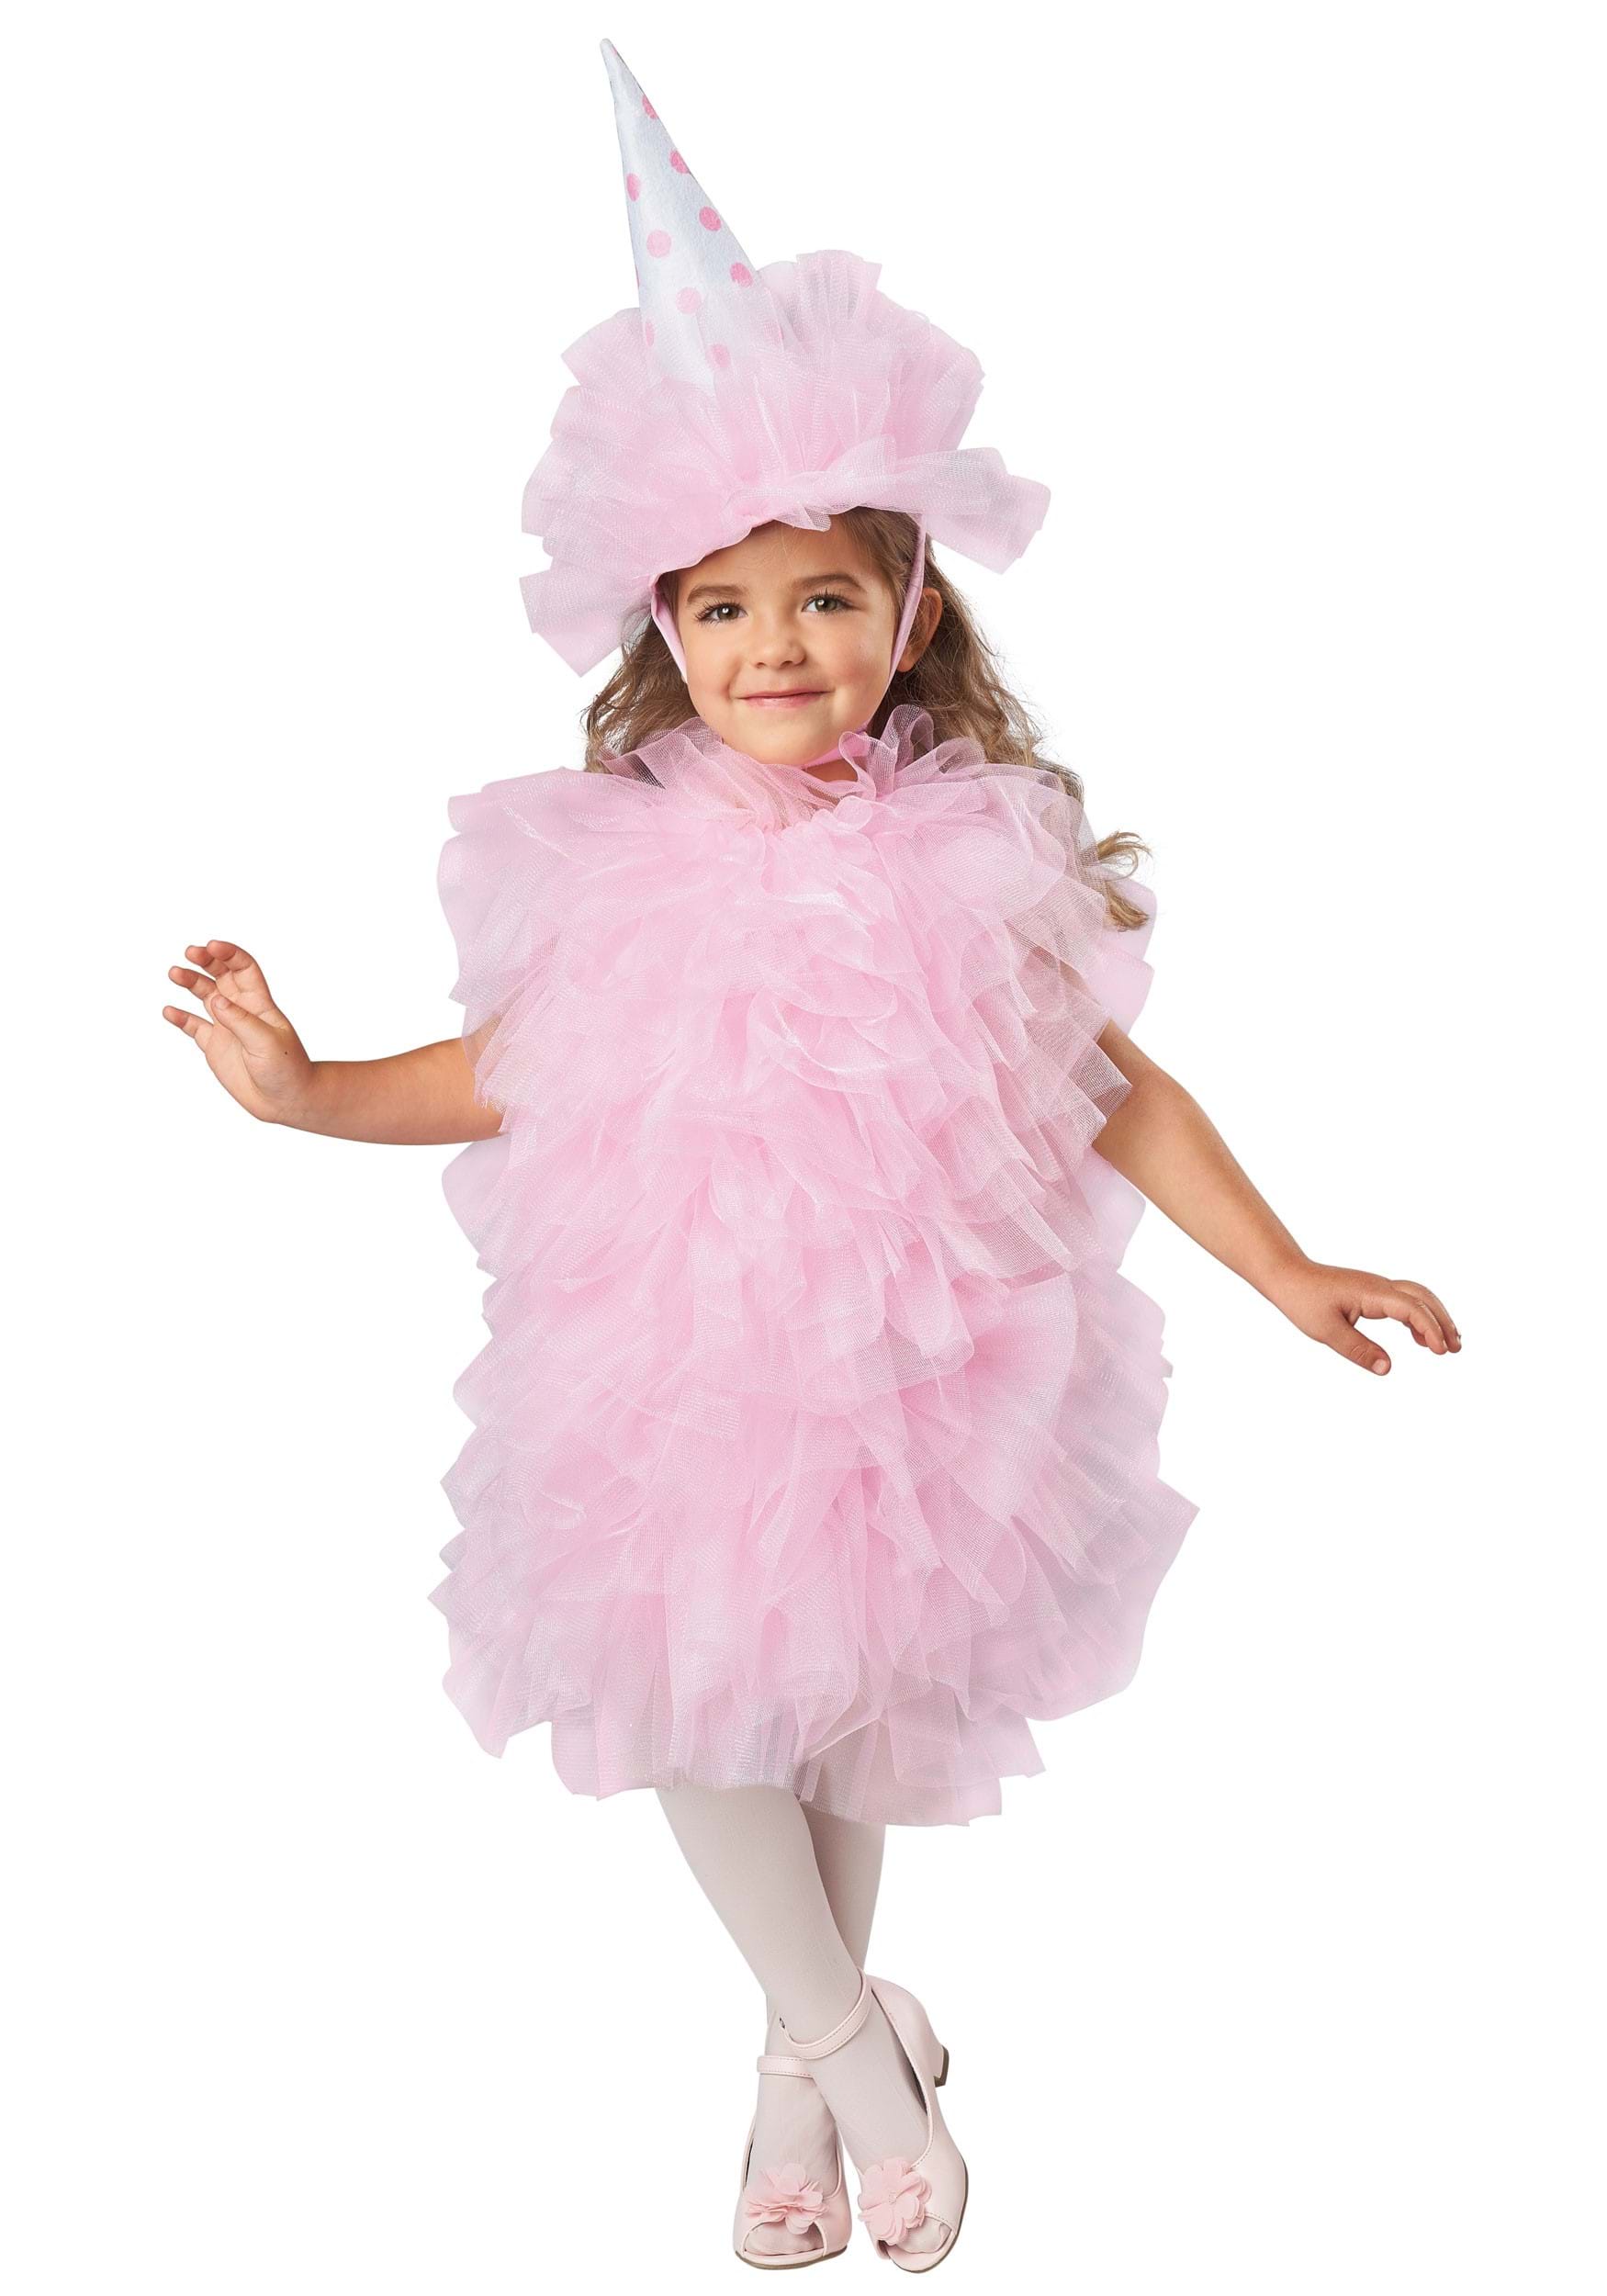 Cotton Candy Costume for Kids